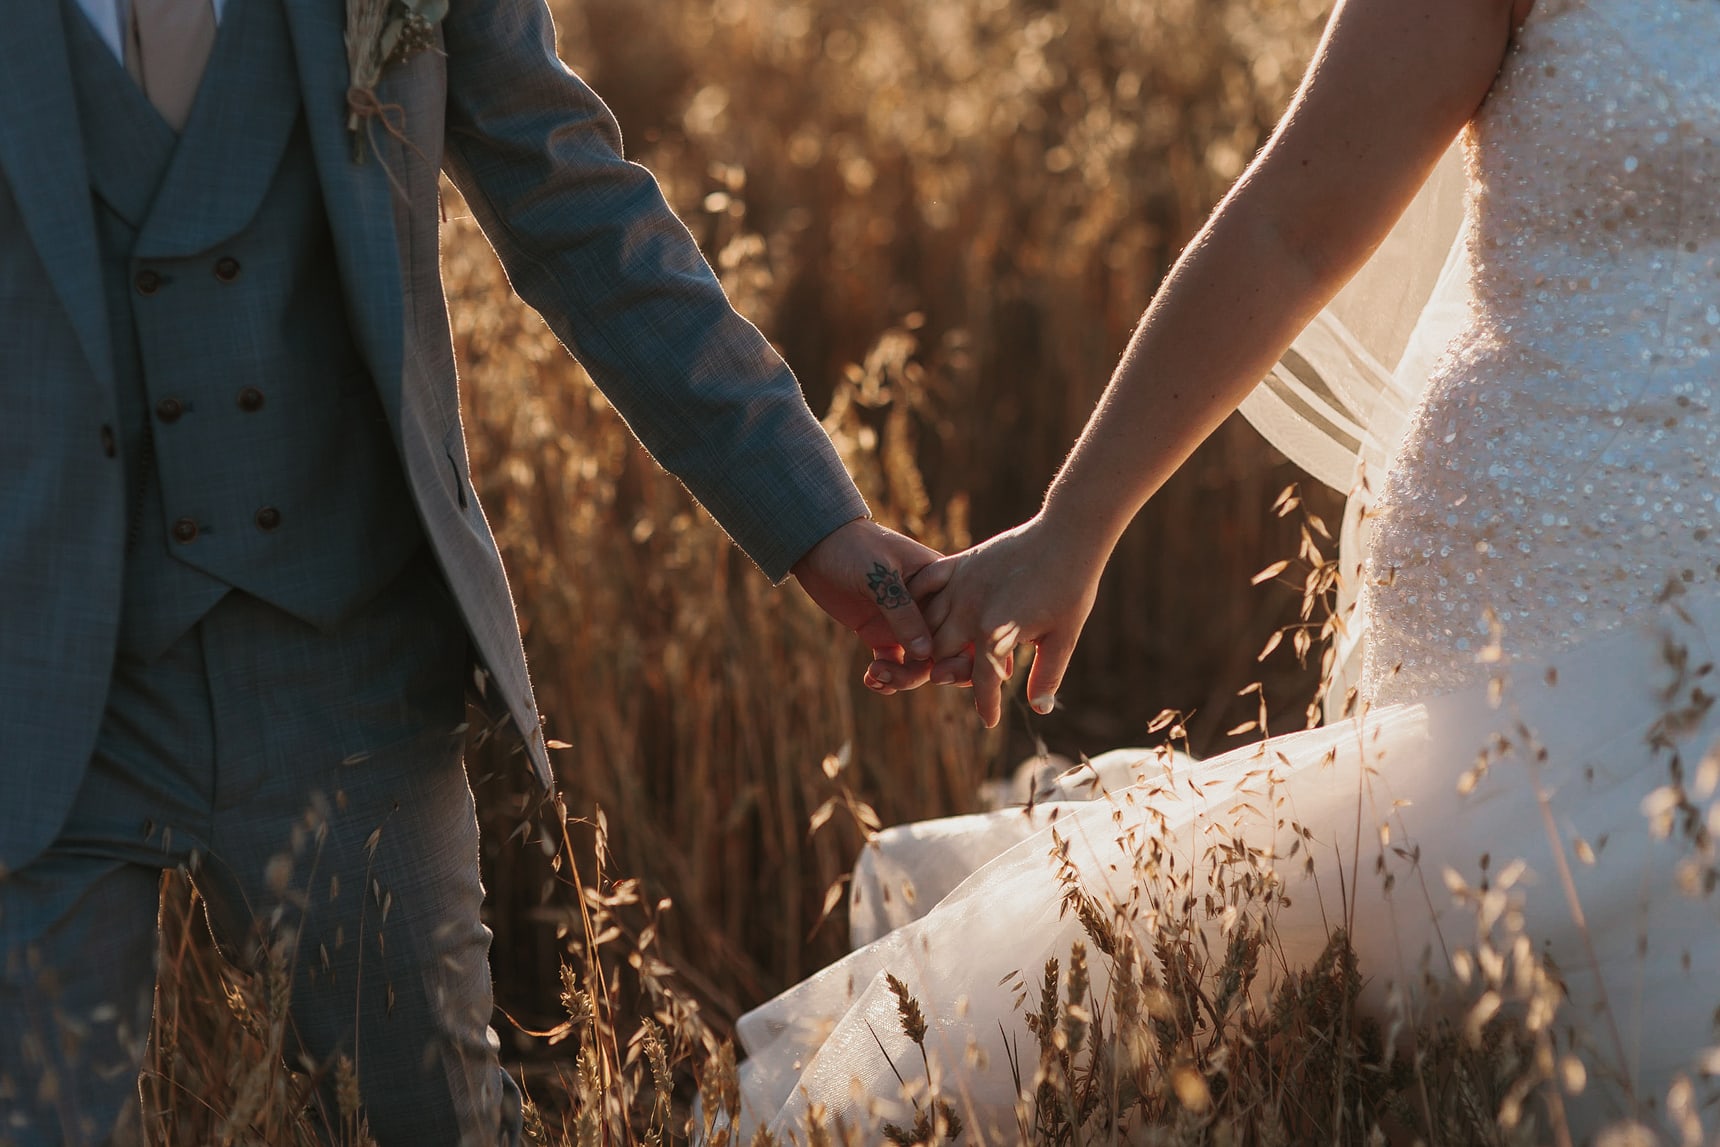 Bride and groom holding hands in a cornfield during sunset somewhere in Essex